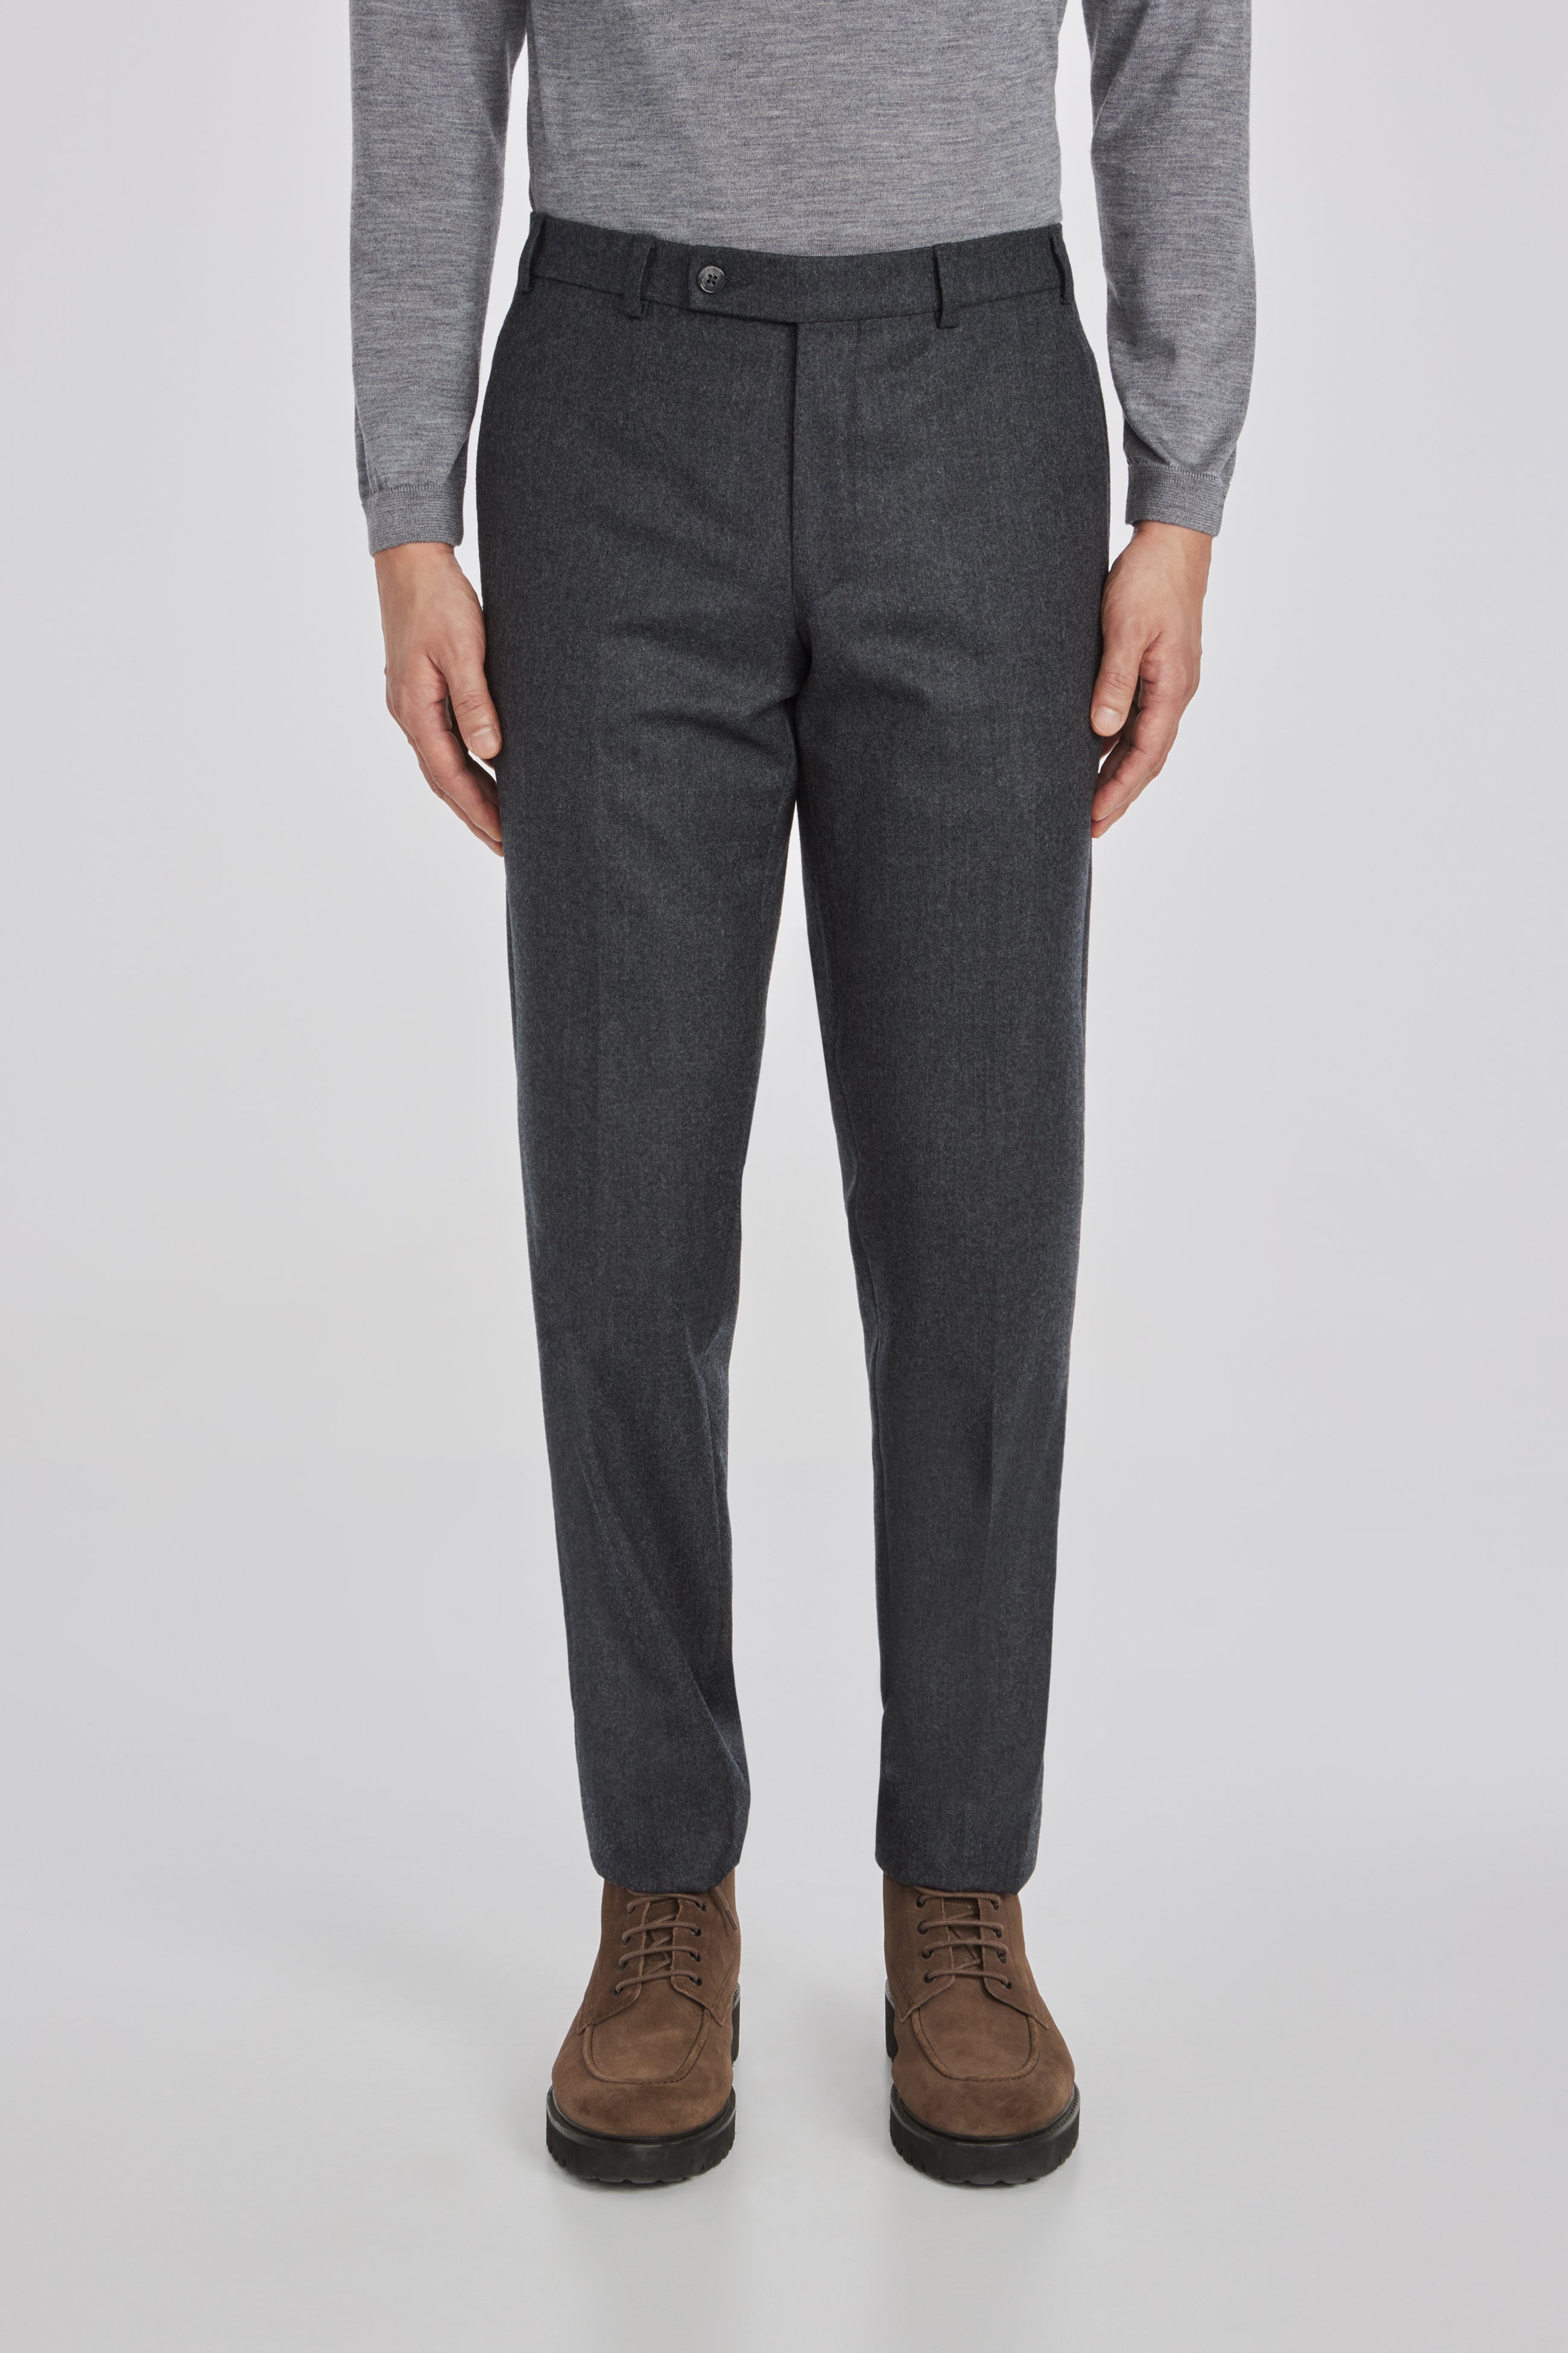 Pablo Charcoal Wool Super 120's Flannel Trouser